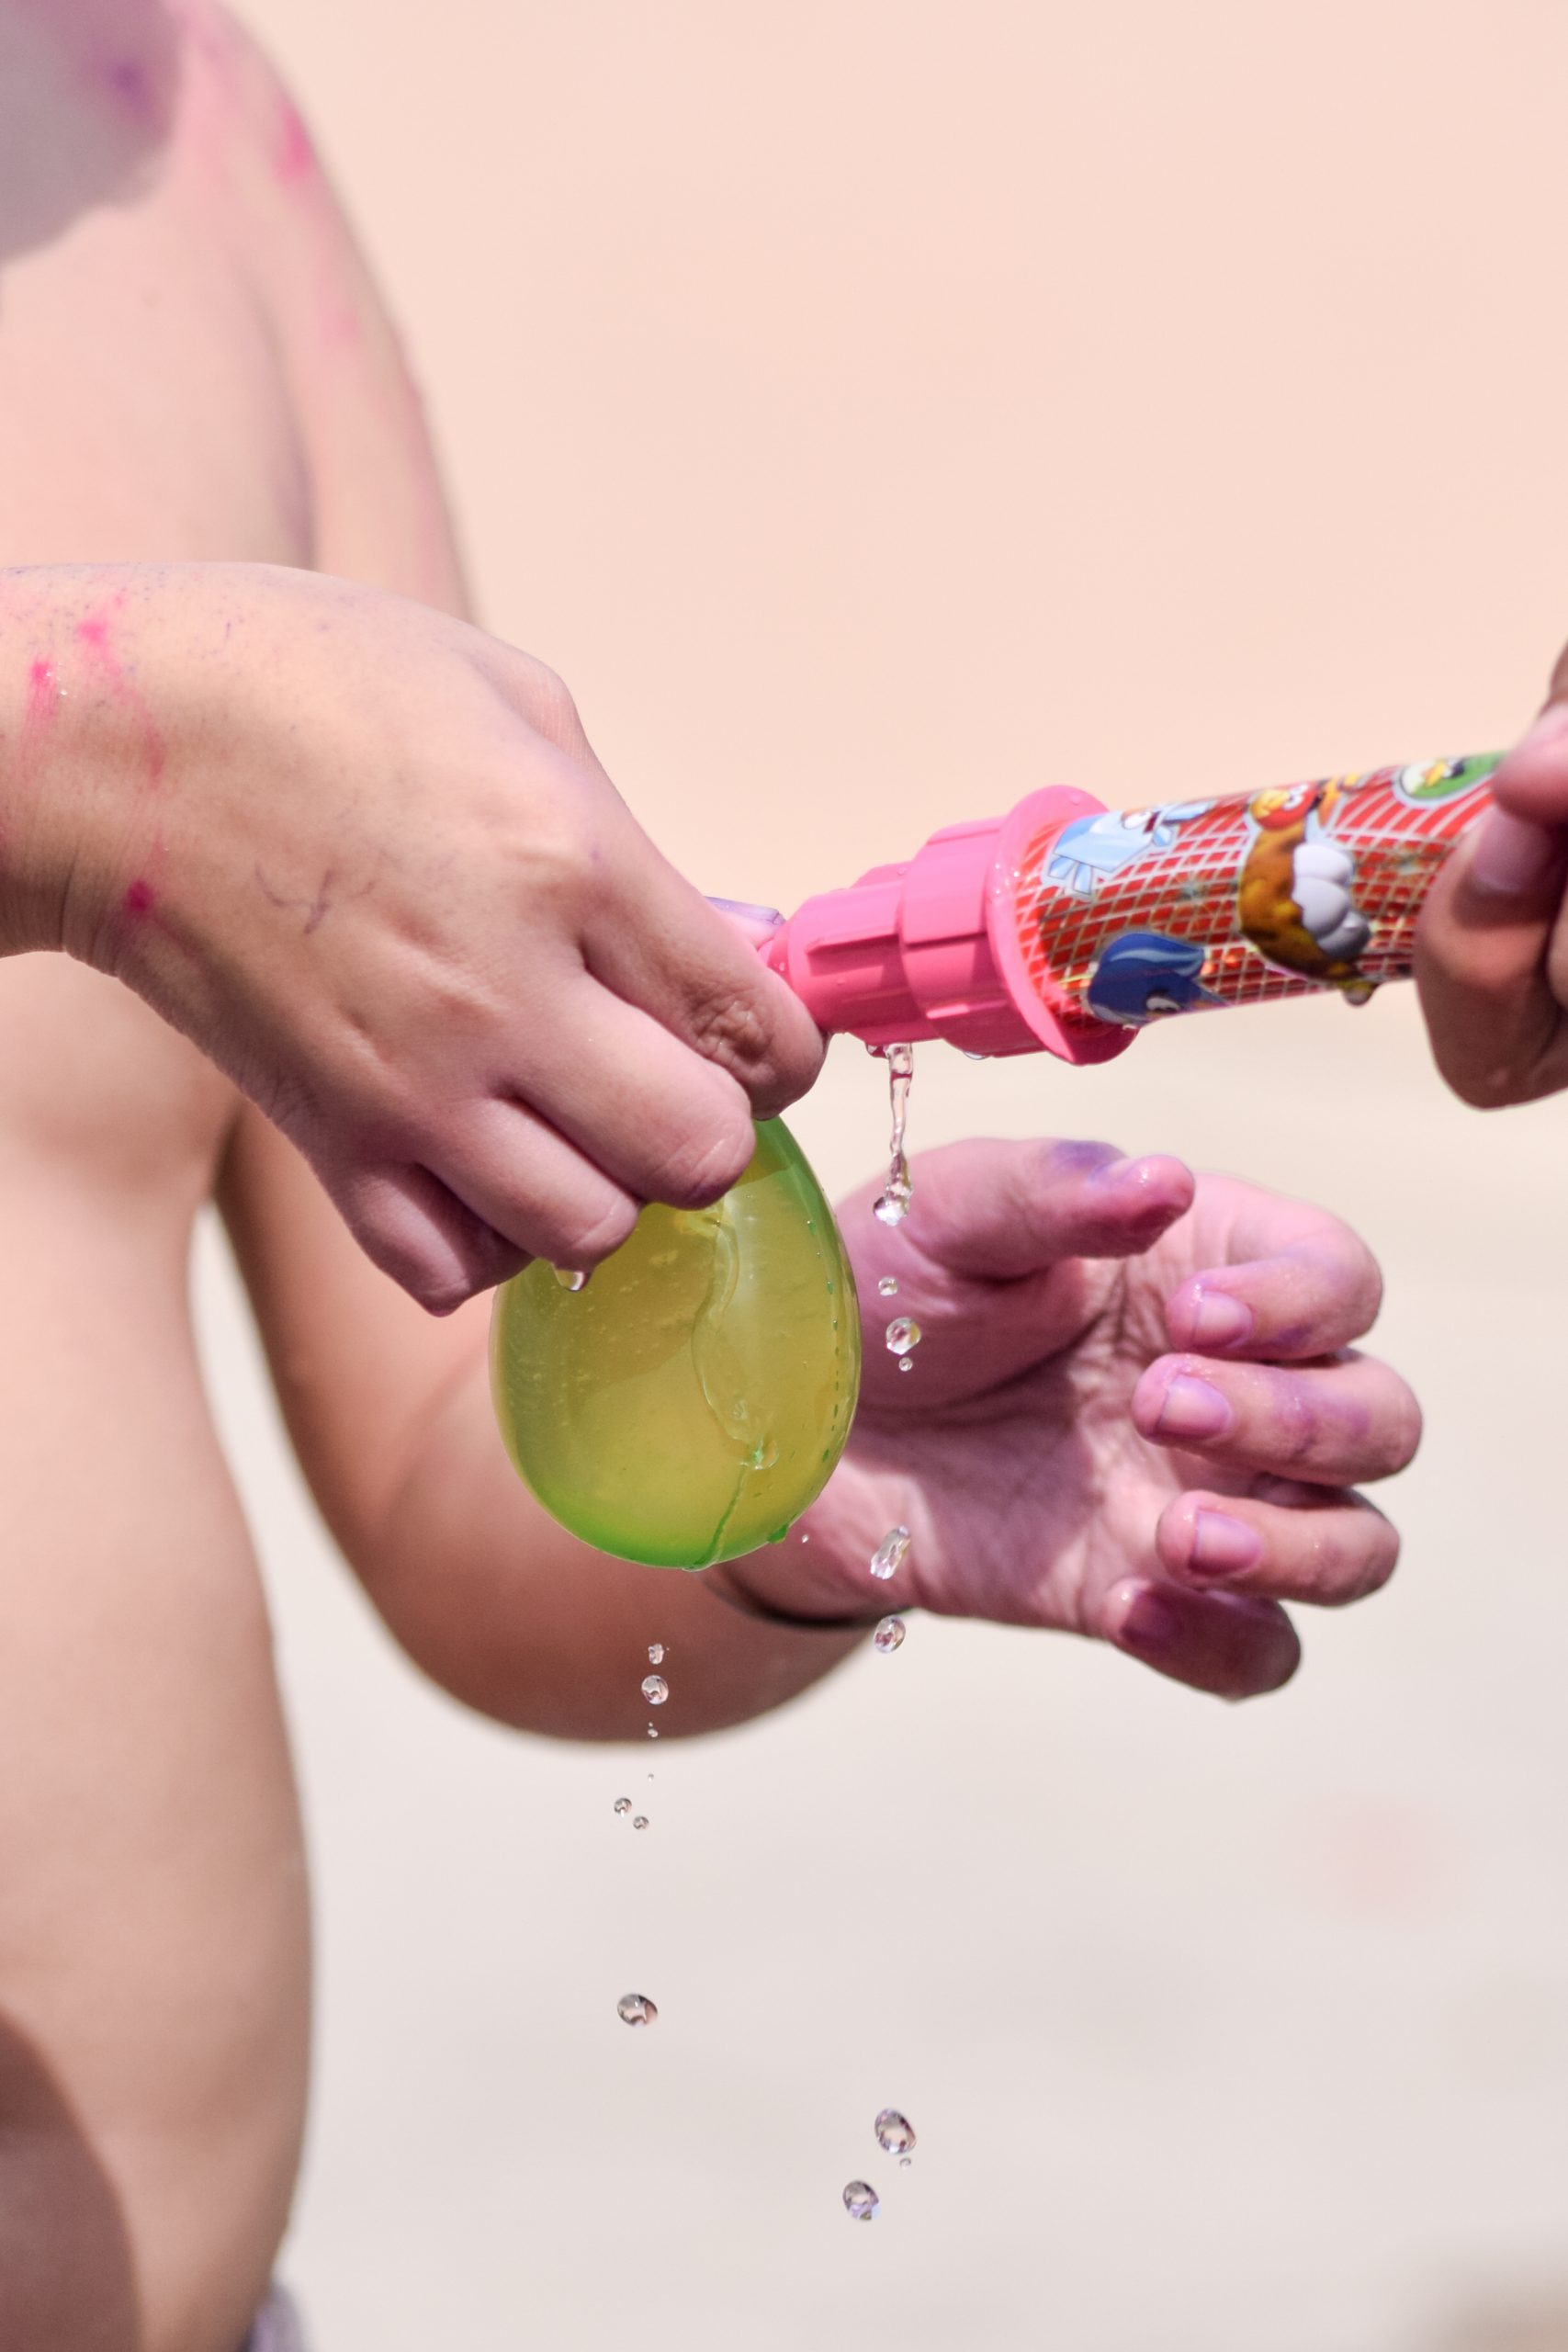 Kids playing with water balloon